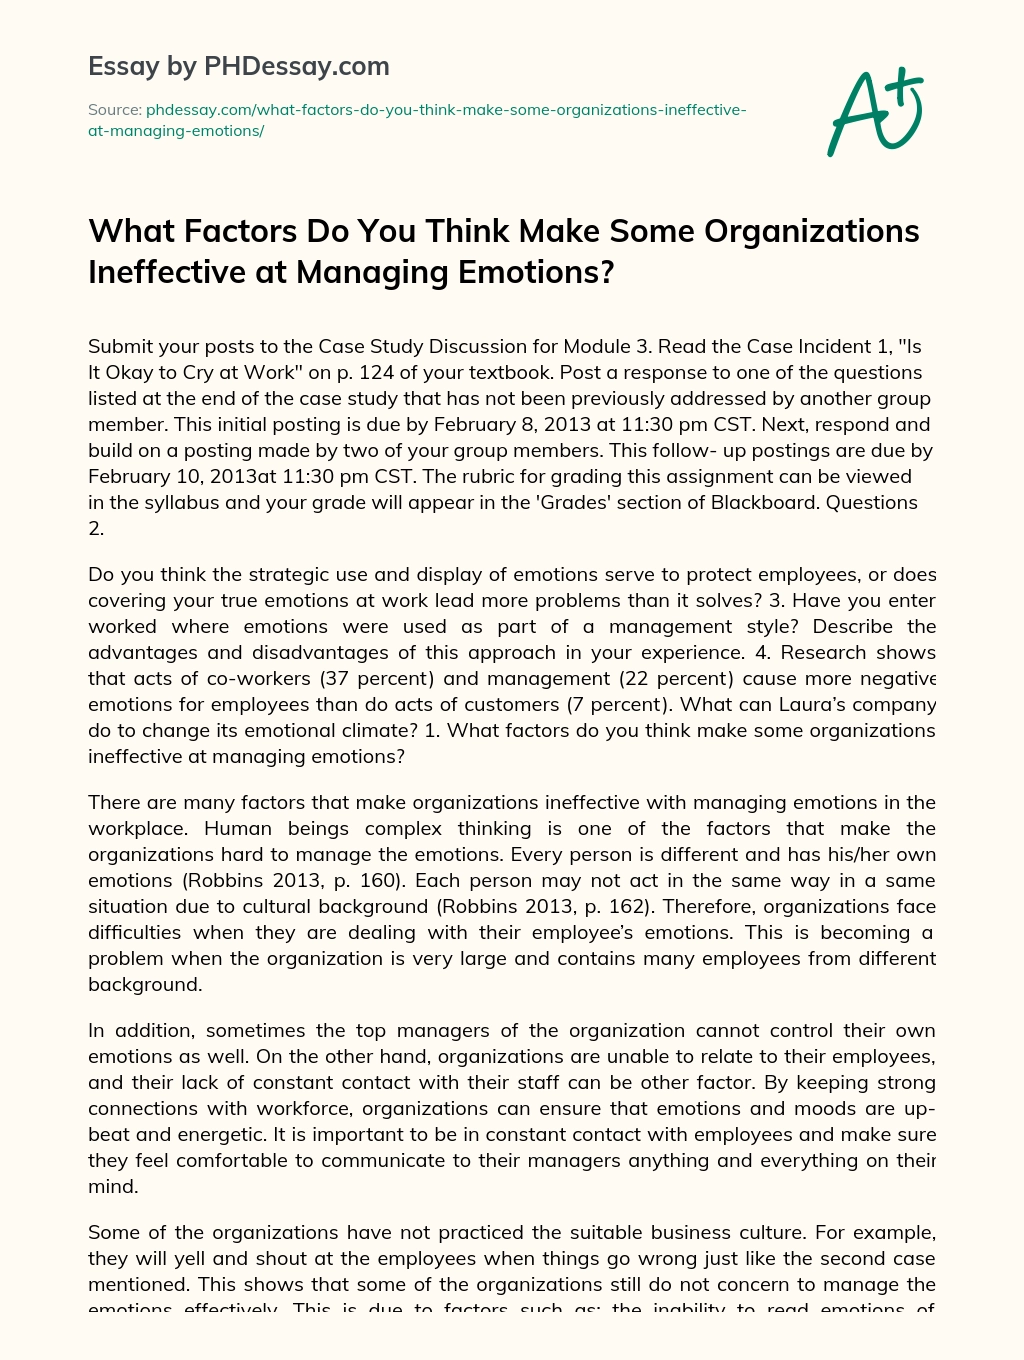 What Factors Do You Think Make Some Organizations Ineffective at Managing Emotions? essay